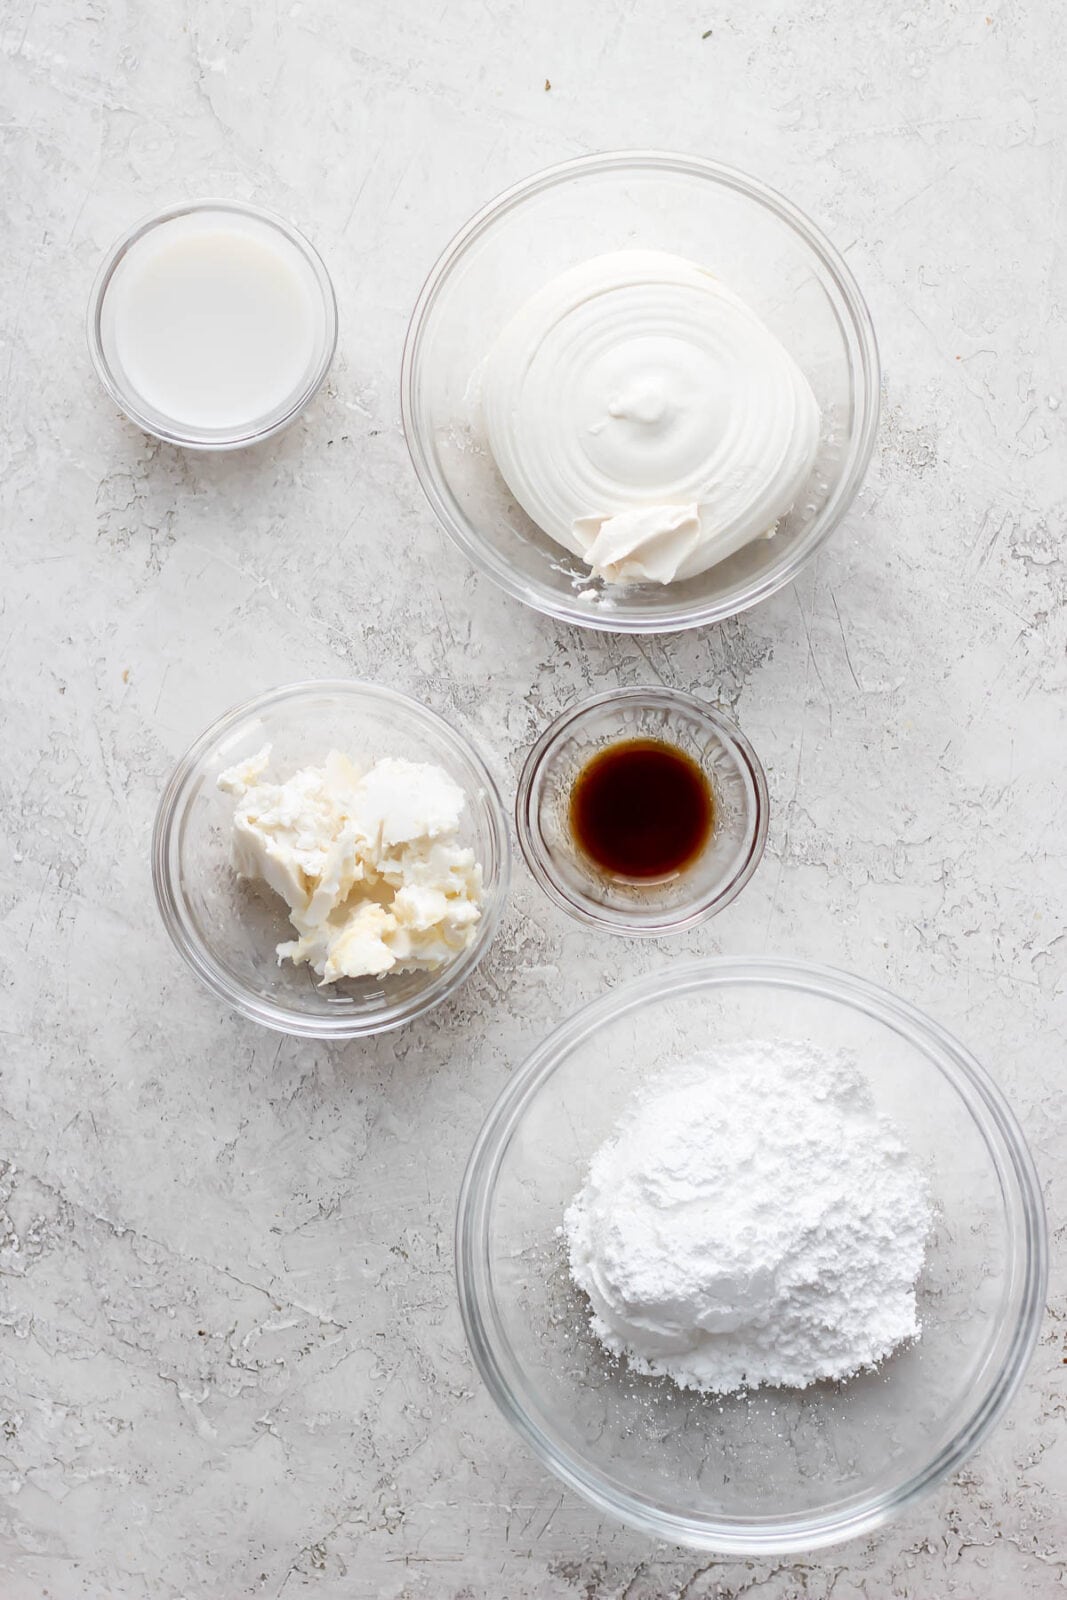 Dairy free cream cheese frosting ingredients measured out into bowls.